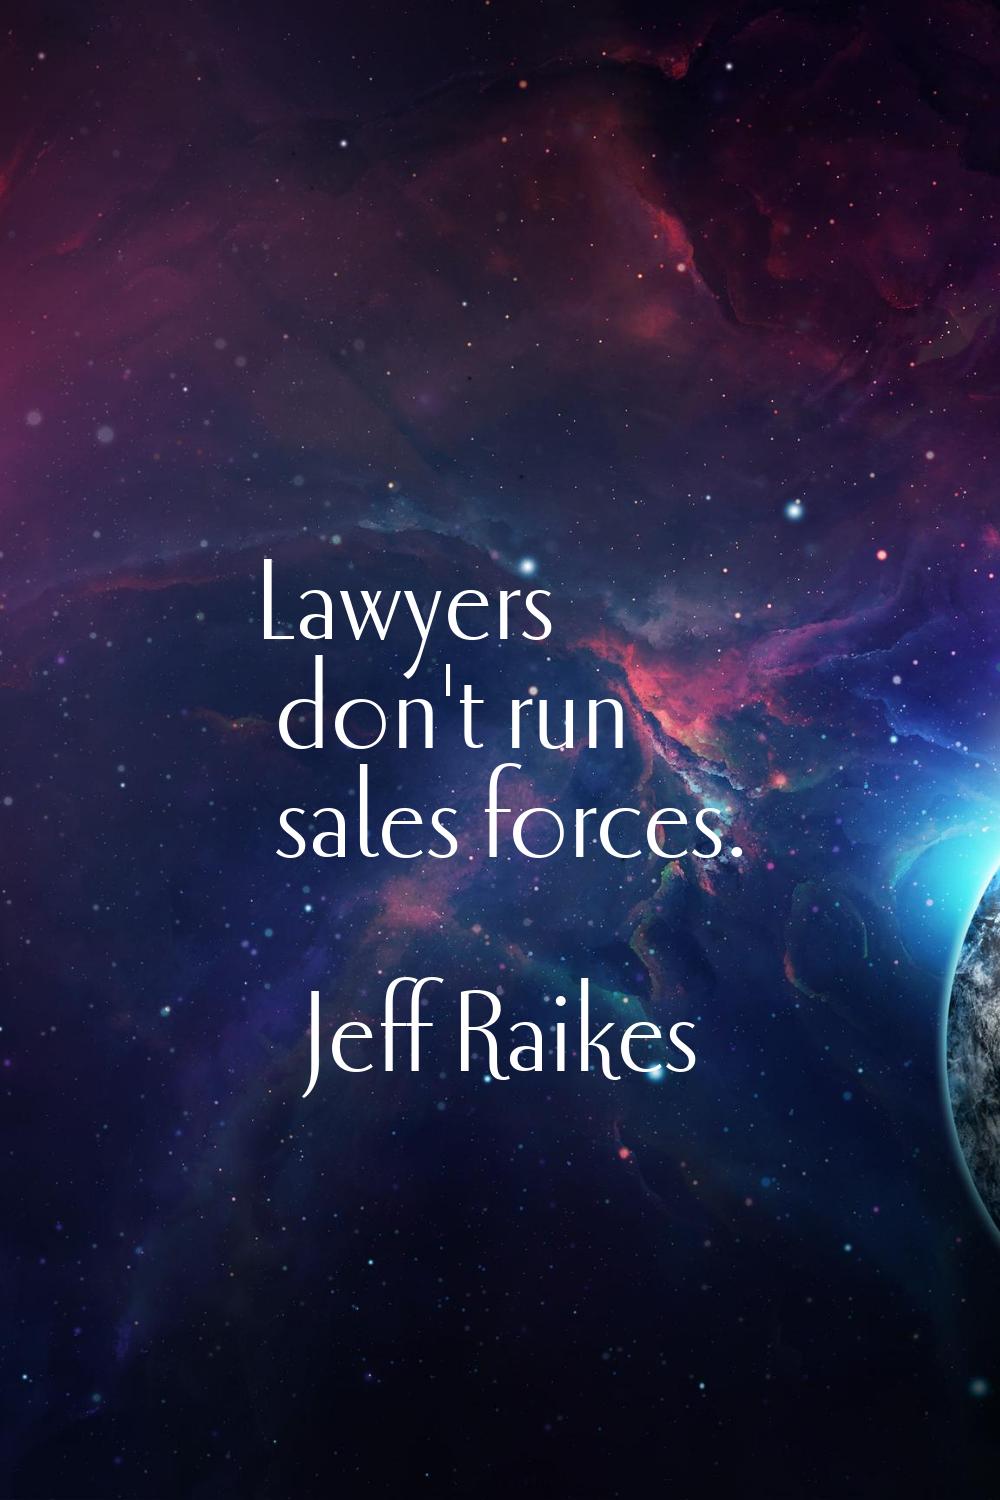 Lawyers don't run sales forces.